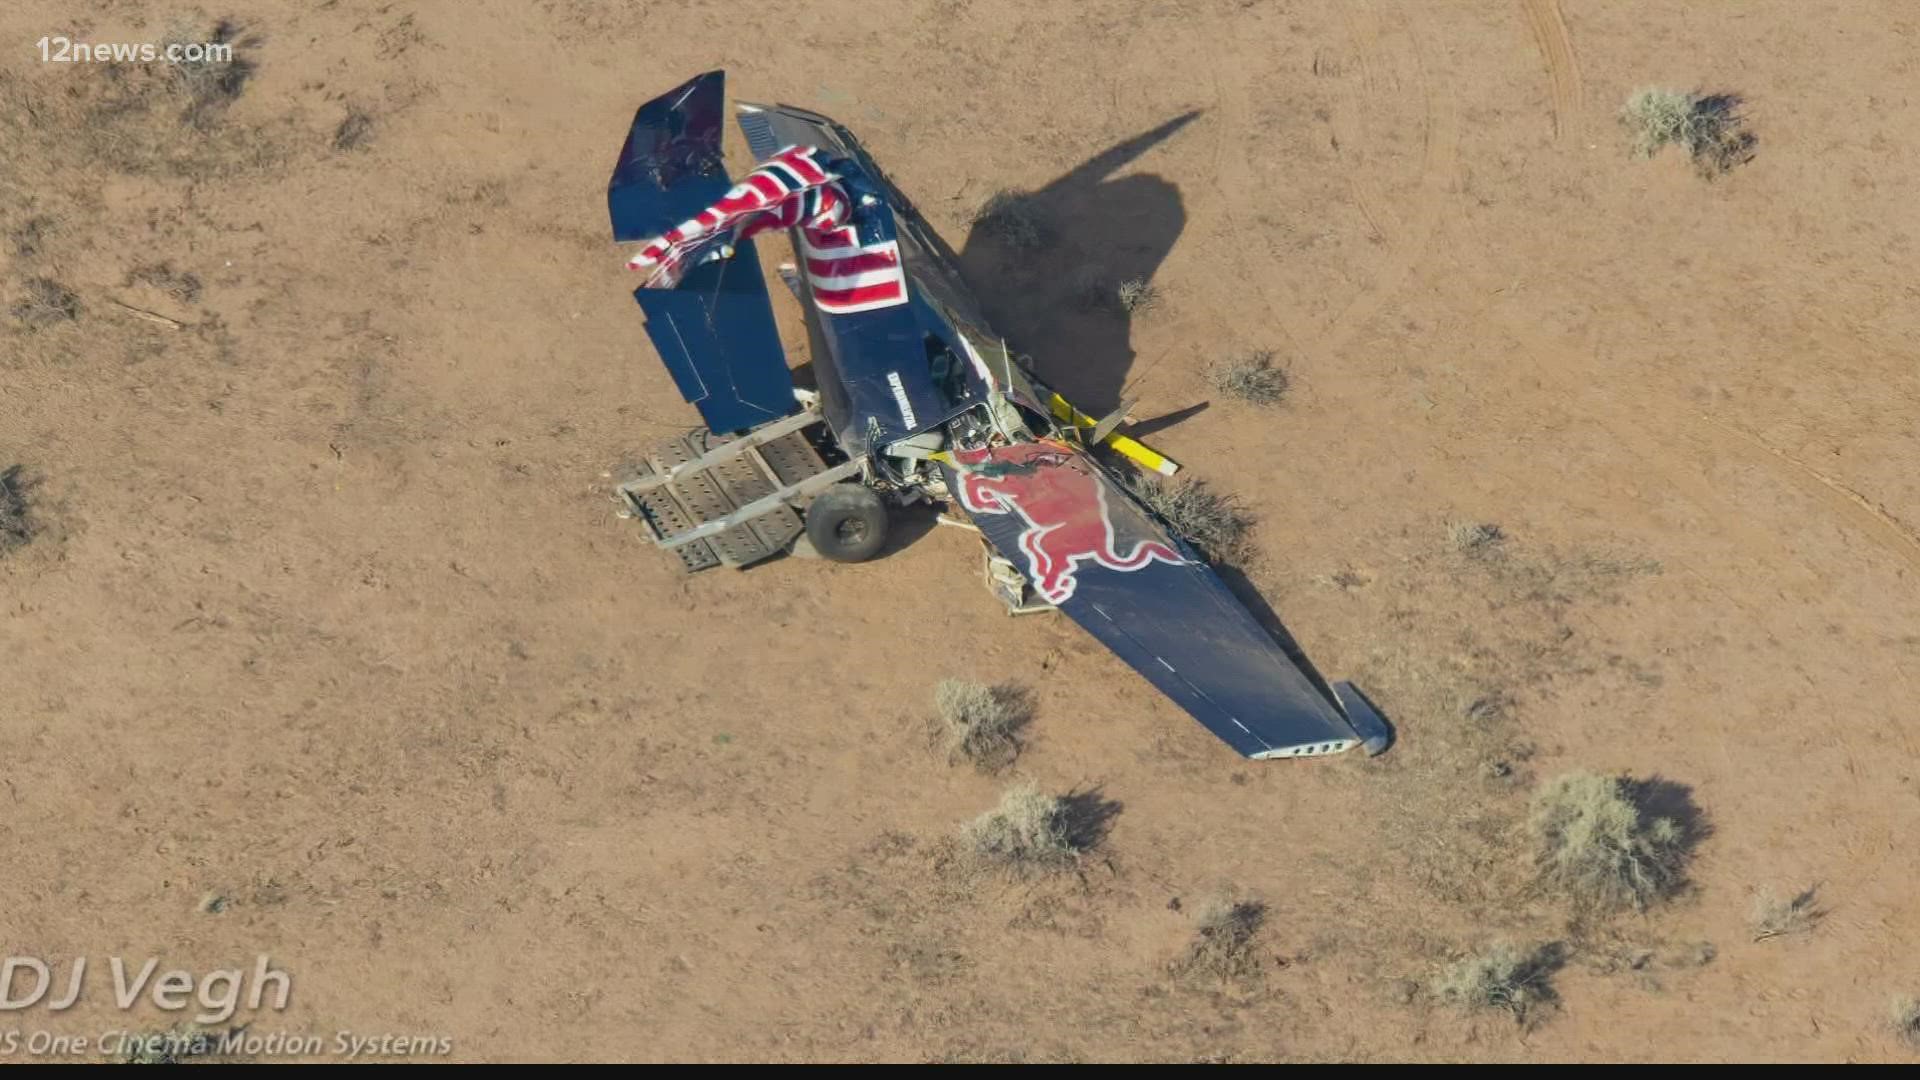 An attempt to complete a groundbreaking stunt sent a plane plummeting into the desert. The FAA denied Red Bull's request for a safety exemption to perform the stunt.